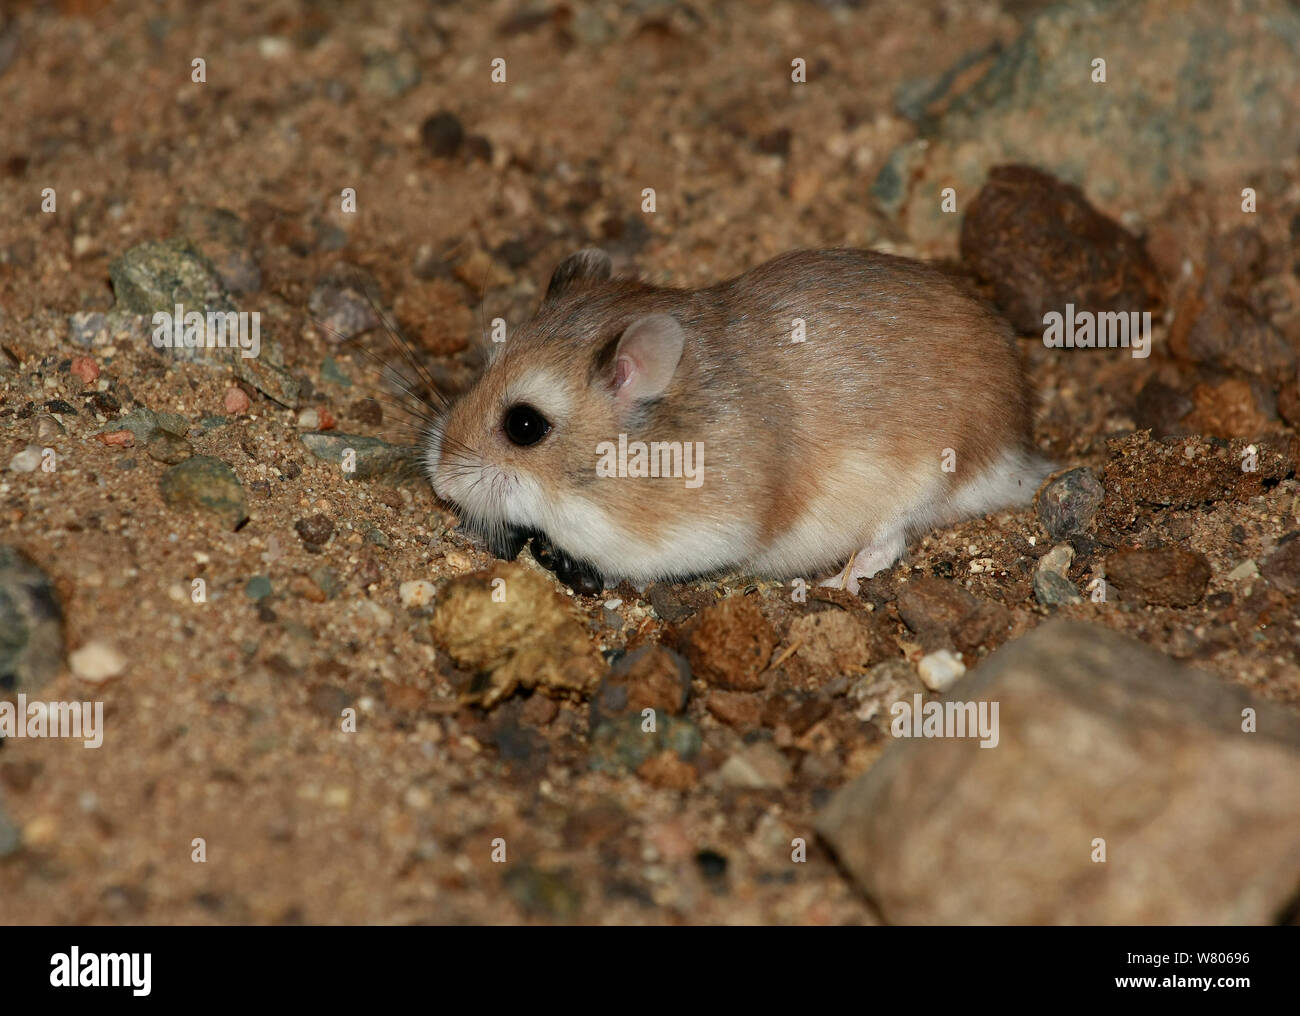 Roborovski hamster (Phodopus roborovskii) in its natural habitat, Northern Gobi, Mongolia. August. This species is commonly kept as pets. Stock Photo